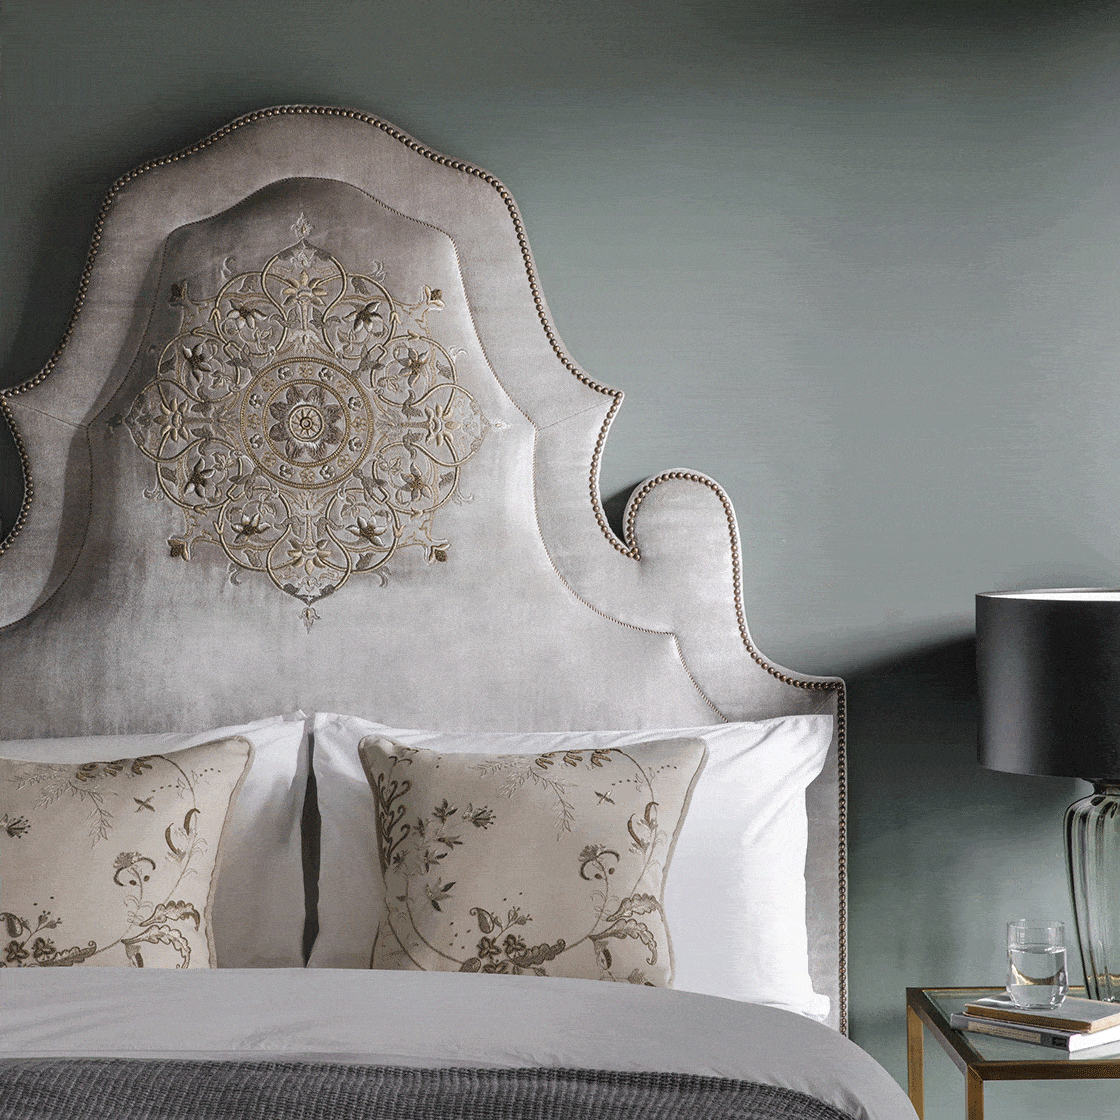 Alhambra headboard with Freya embroidery on Capri silk velvet - Argent with Moliere cushion - Beaumont & Fletcher